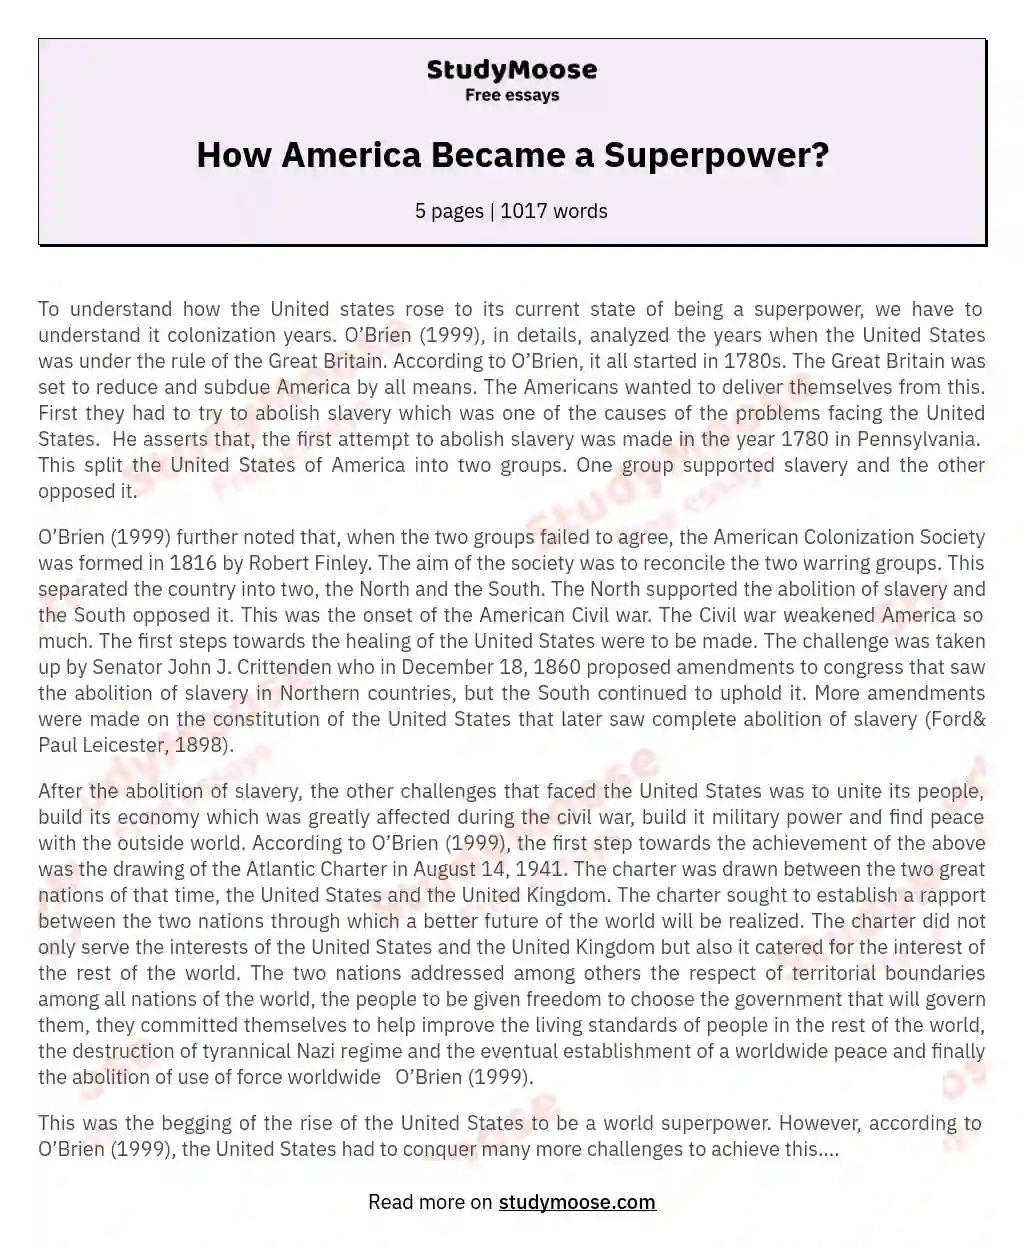 How America Became a Superpower?